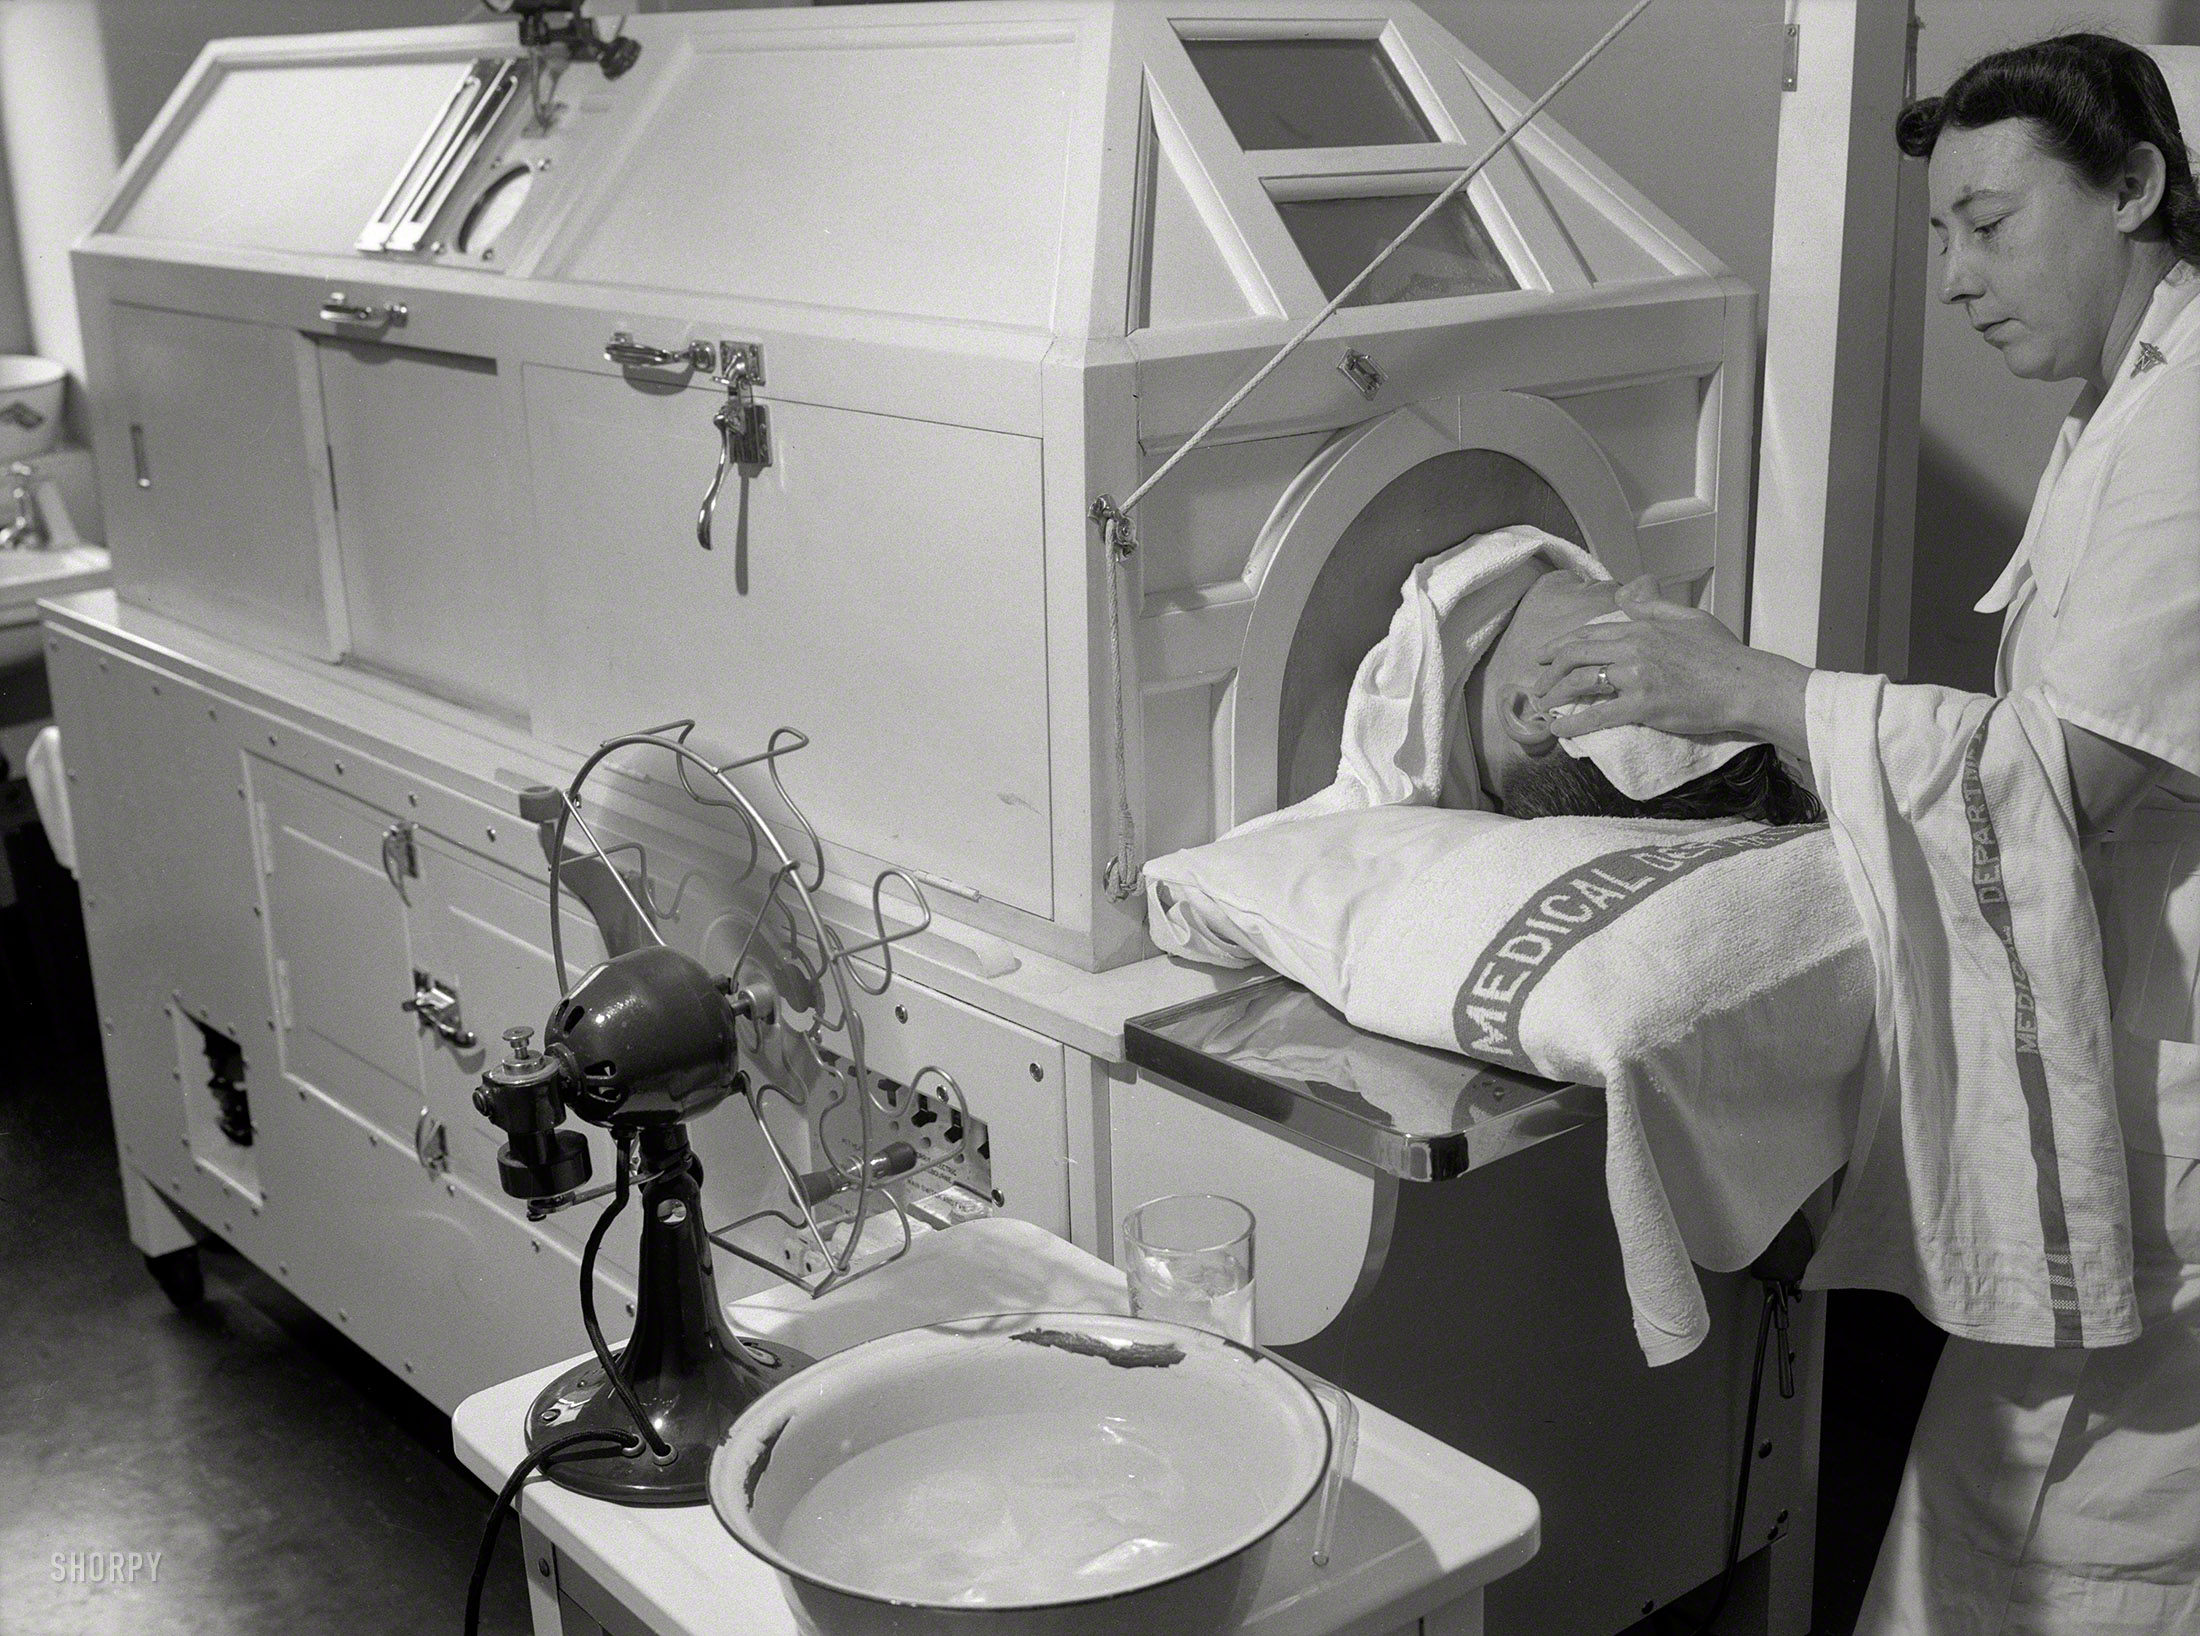 1943. "Melbourne, Australia. United States Army hospital. Patient receiving treatment in new fever machine which keeps temperature at 107 degrees (108 degrees is fatal). Note ice in basin and fan to cool head." Photo by Jo. Fallon for the Office of War Information. View full size.